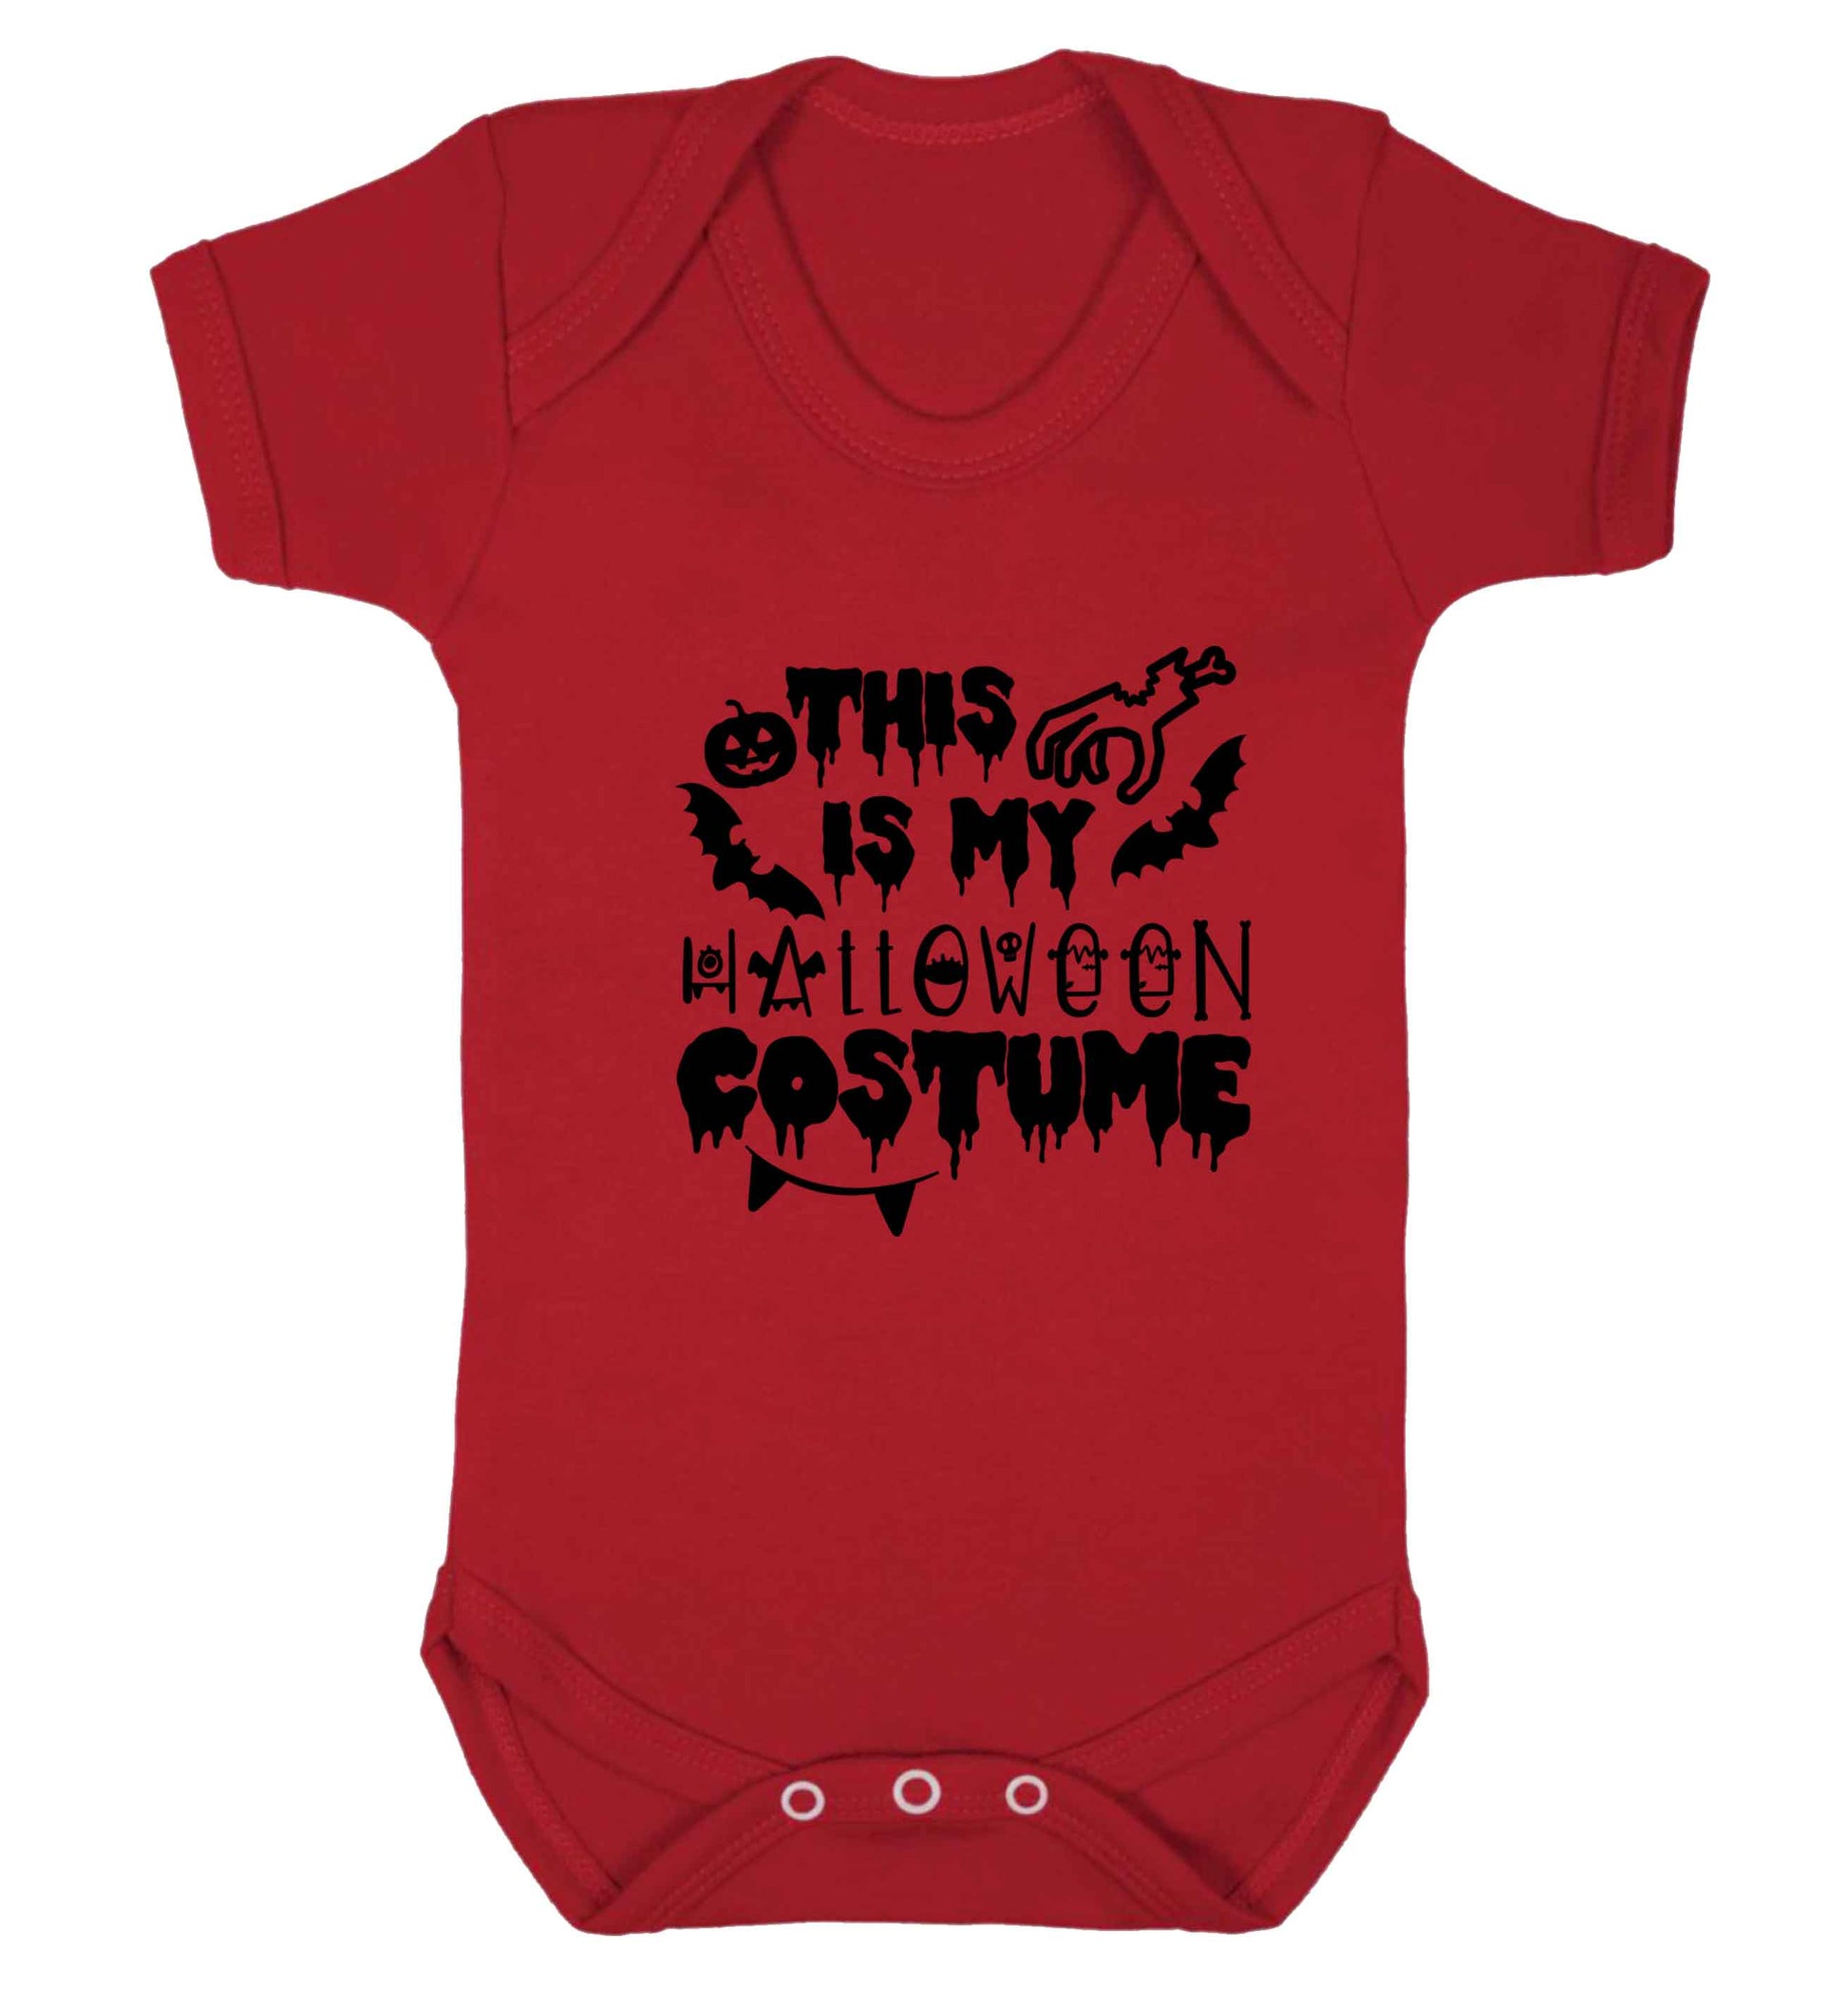 This is my halloween costume baby vest red 18-24 months